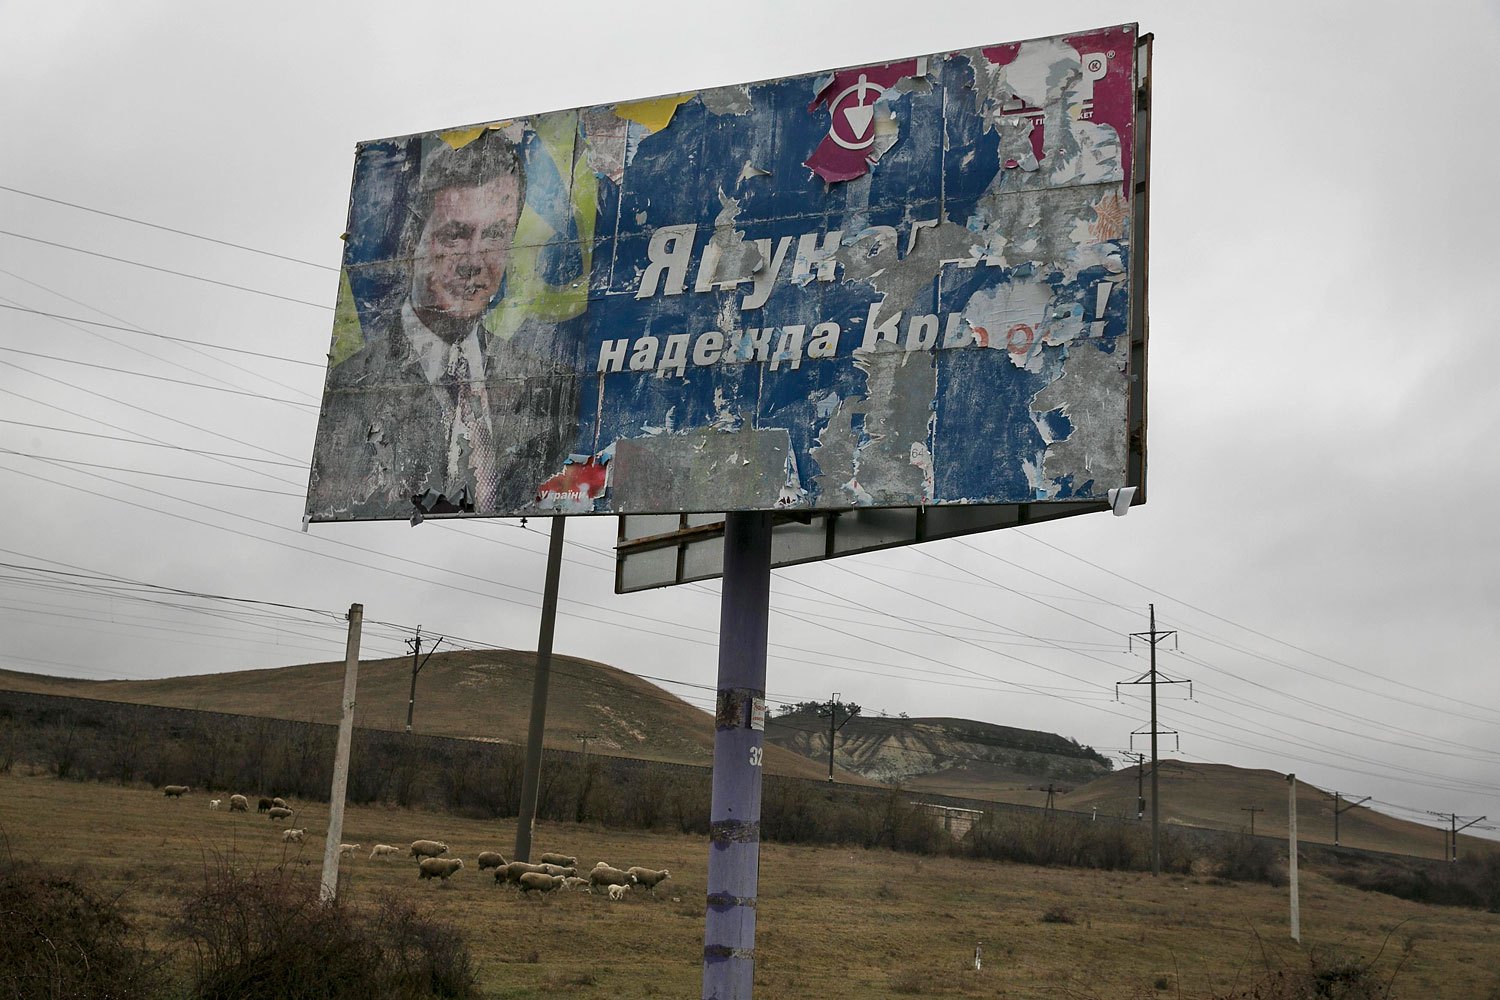 Sheep graze next to an old election sign on a road from Simferopol to Sevastopol reads "Yanukovych is the hope of Crimea", Feb. 27, 2014.